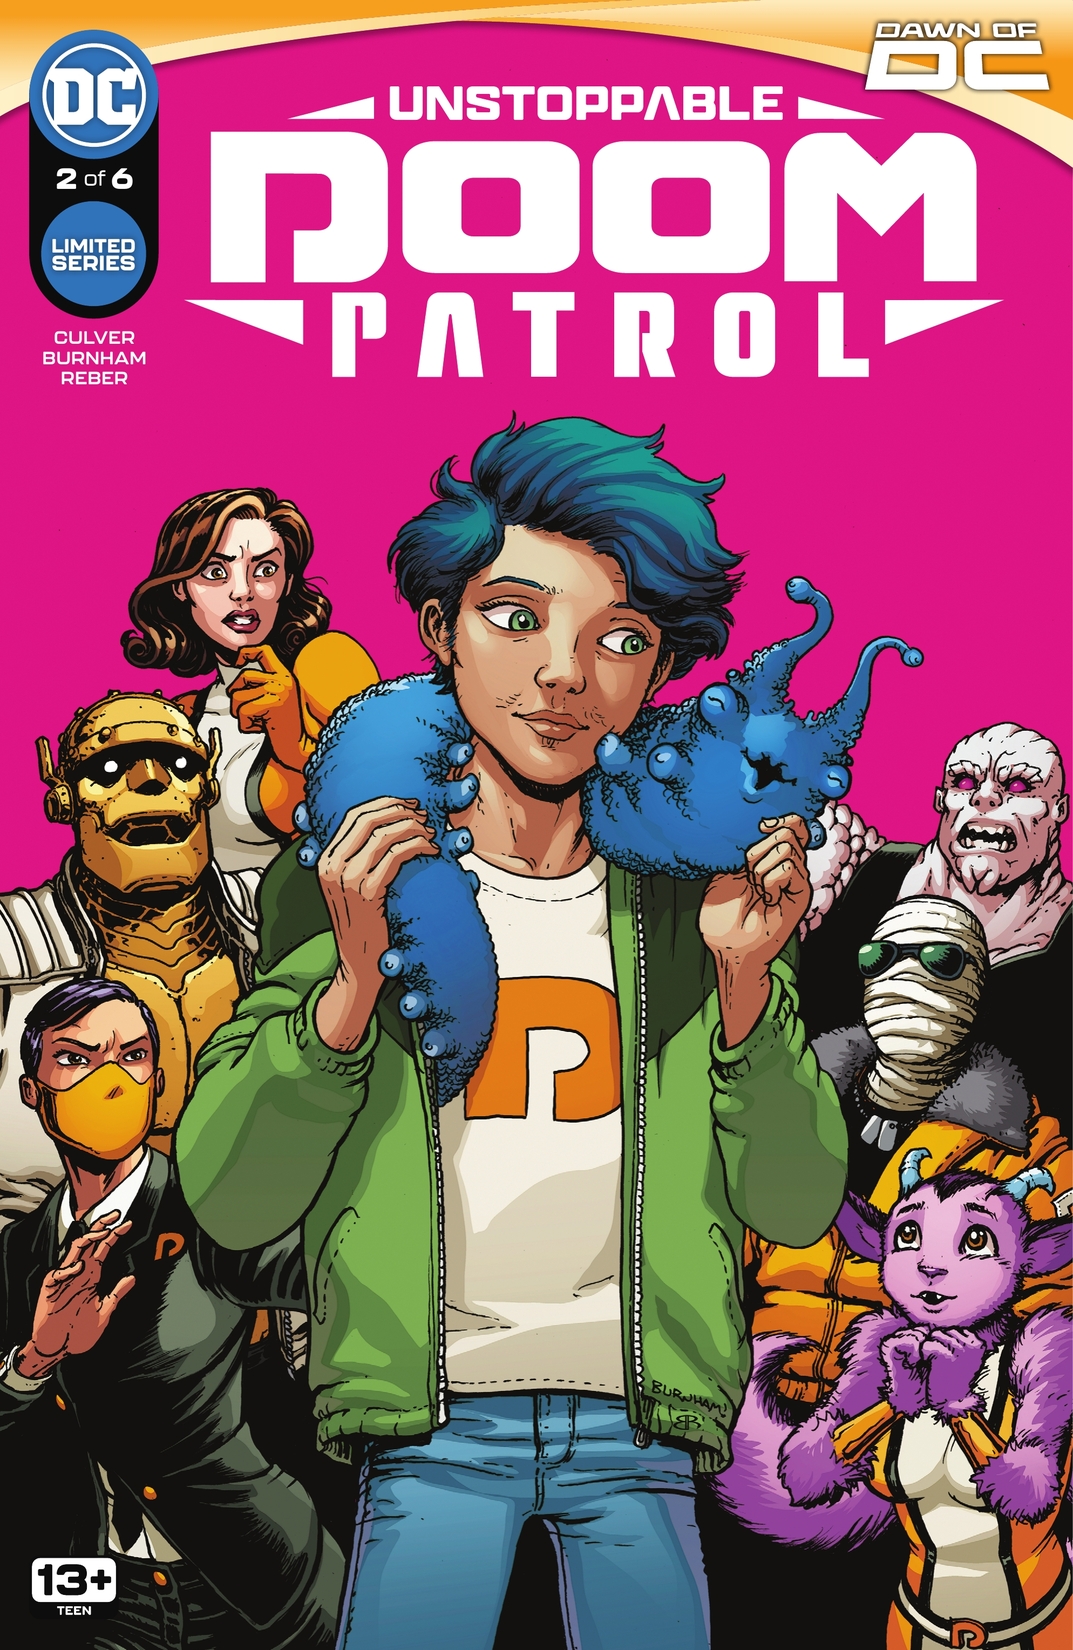 Unstoppable Doom Patrol #2 preview images